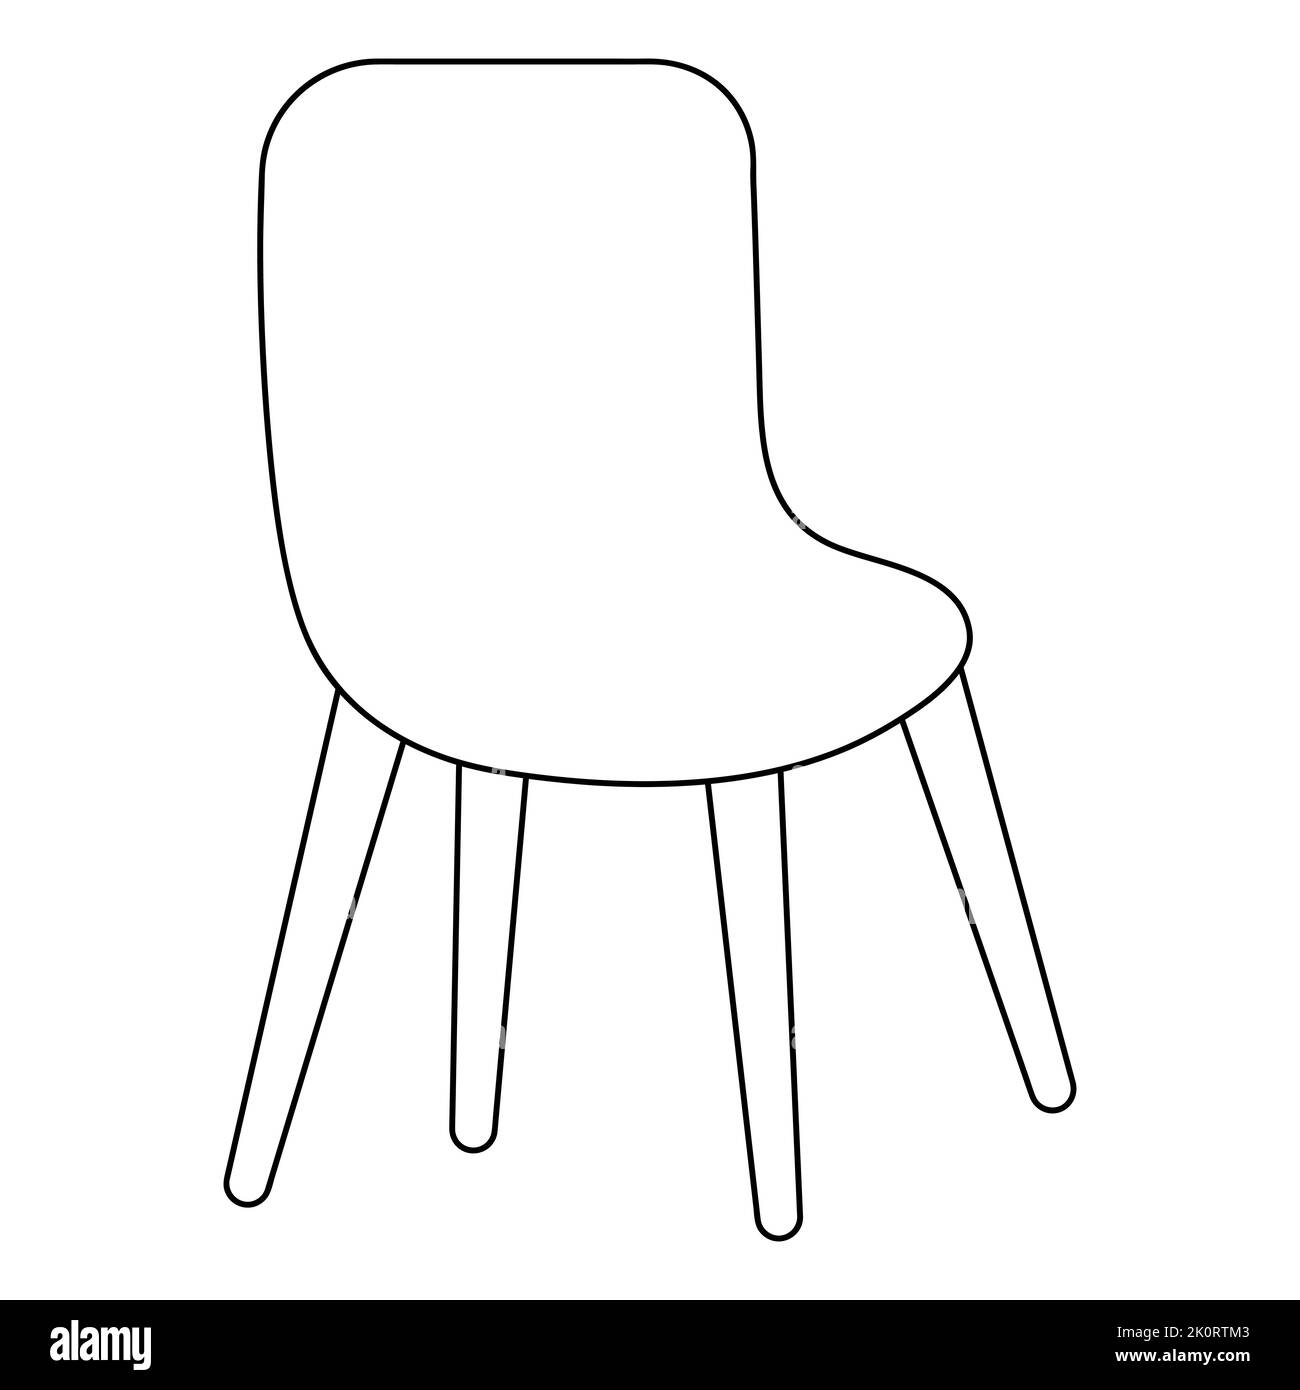 Armchair. Sketch. Chair back view. Interior element. Vector illustration. Outline on isolated background. Furniture for home and office. Stock Vector